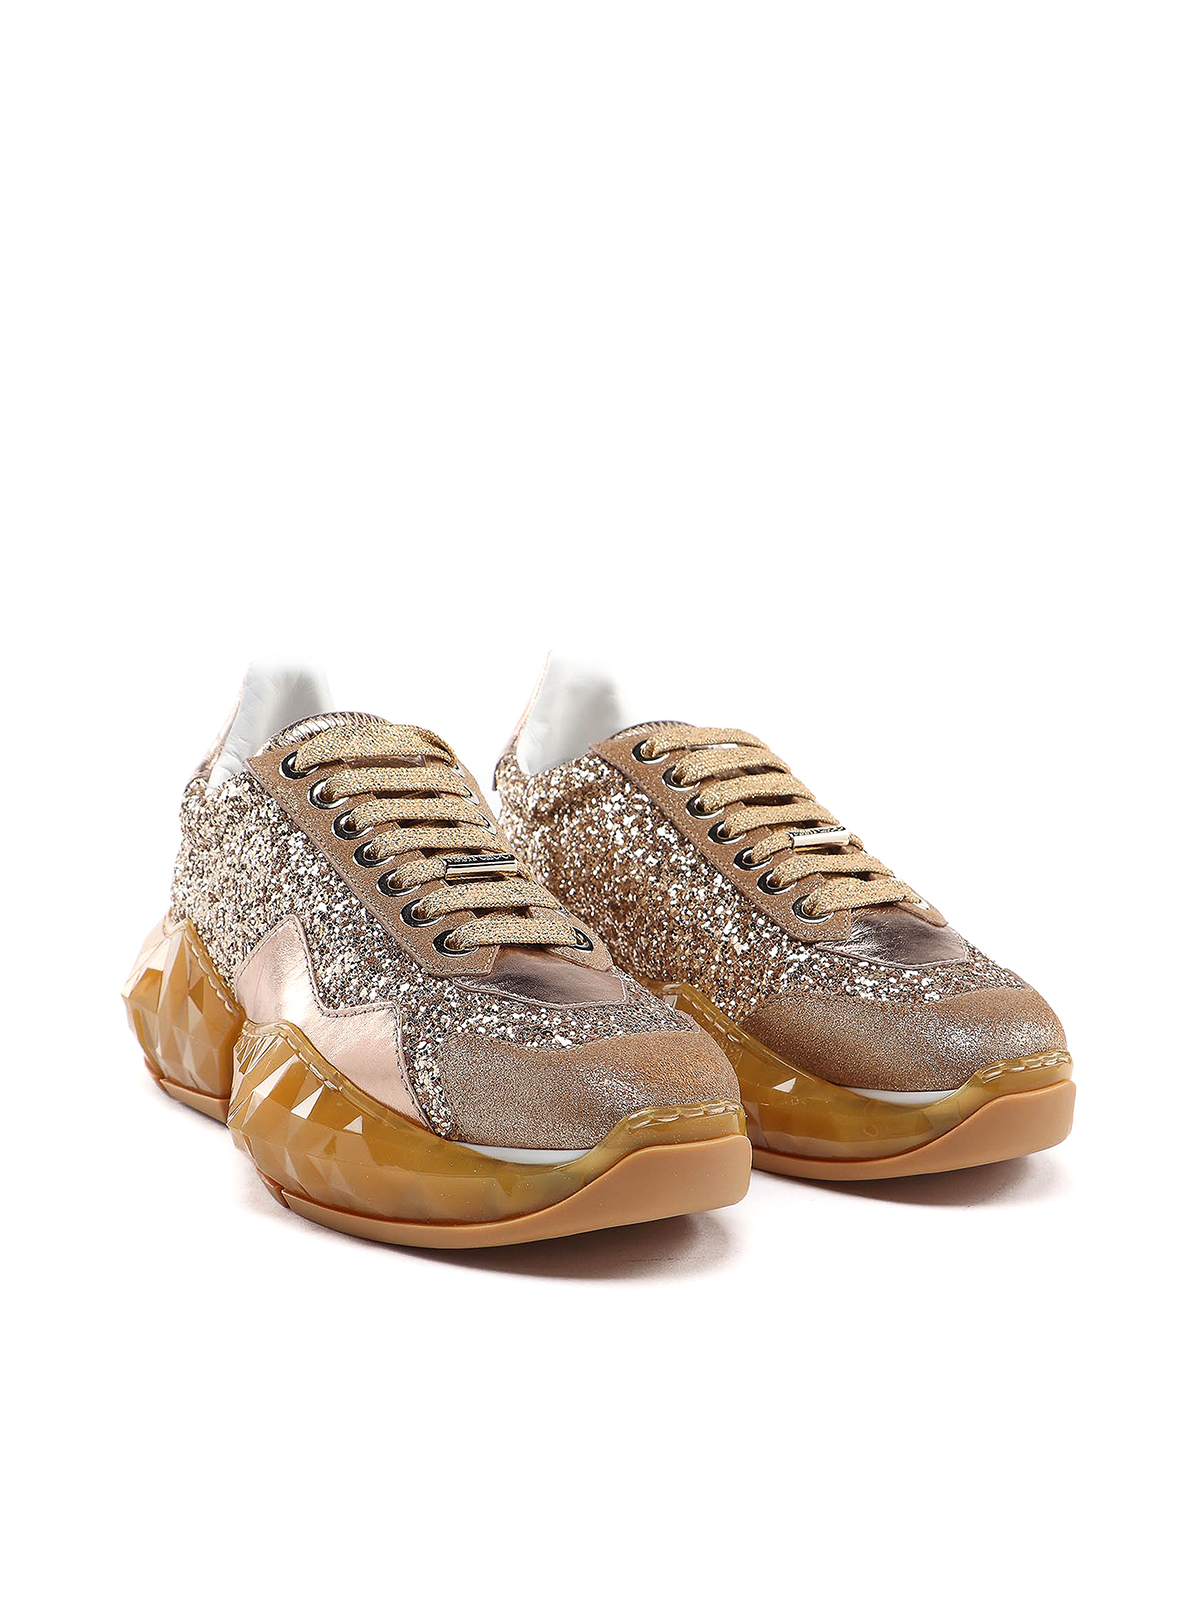 Buy the Authentic Jimmy Choo Mid Metallic Sneakers W 6.5 | GoodwillFinds